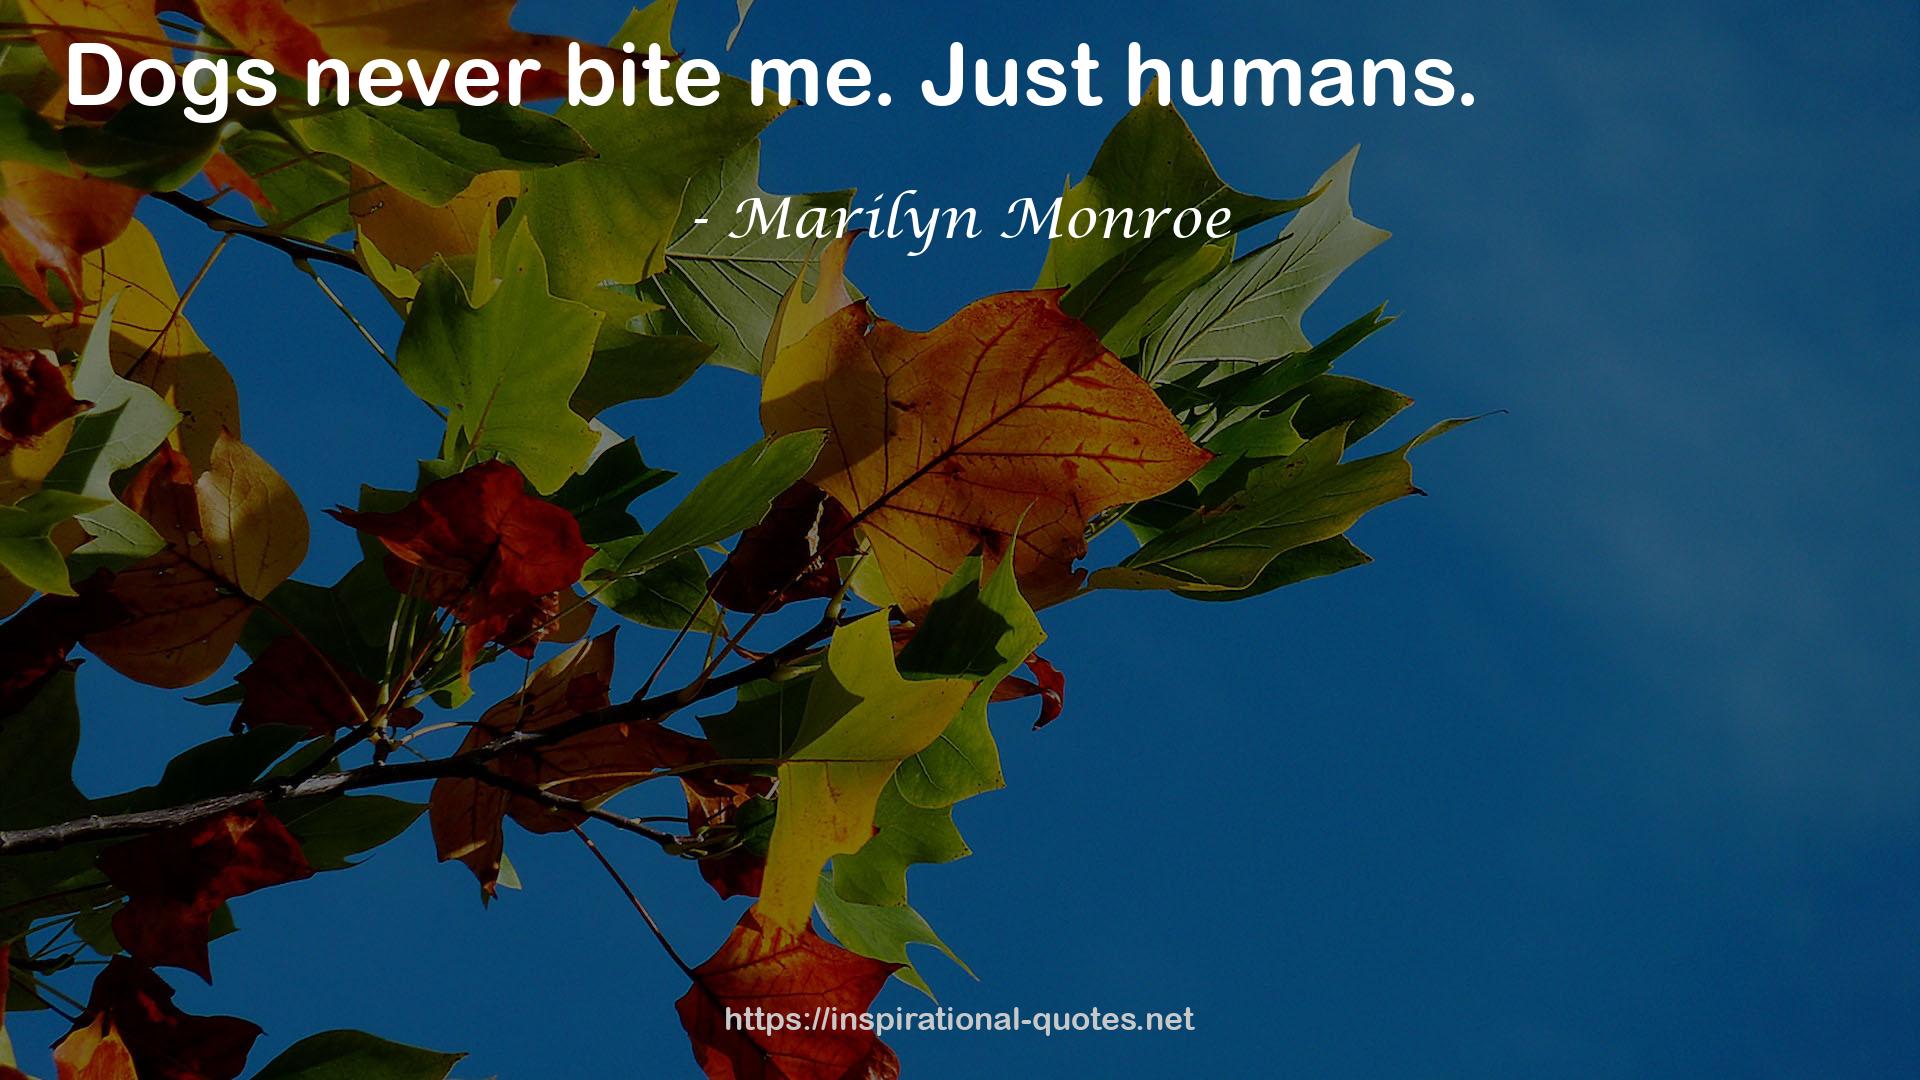 Marilyn Monroe QUOTES